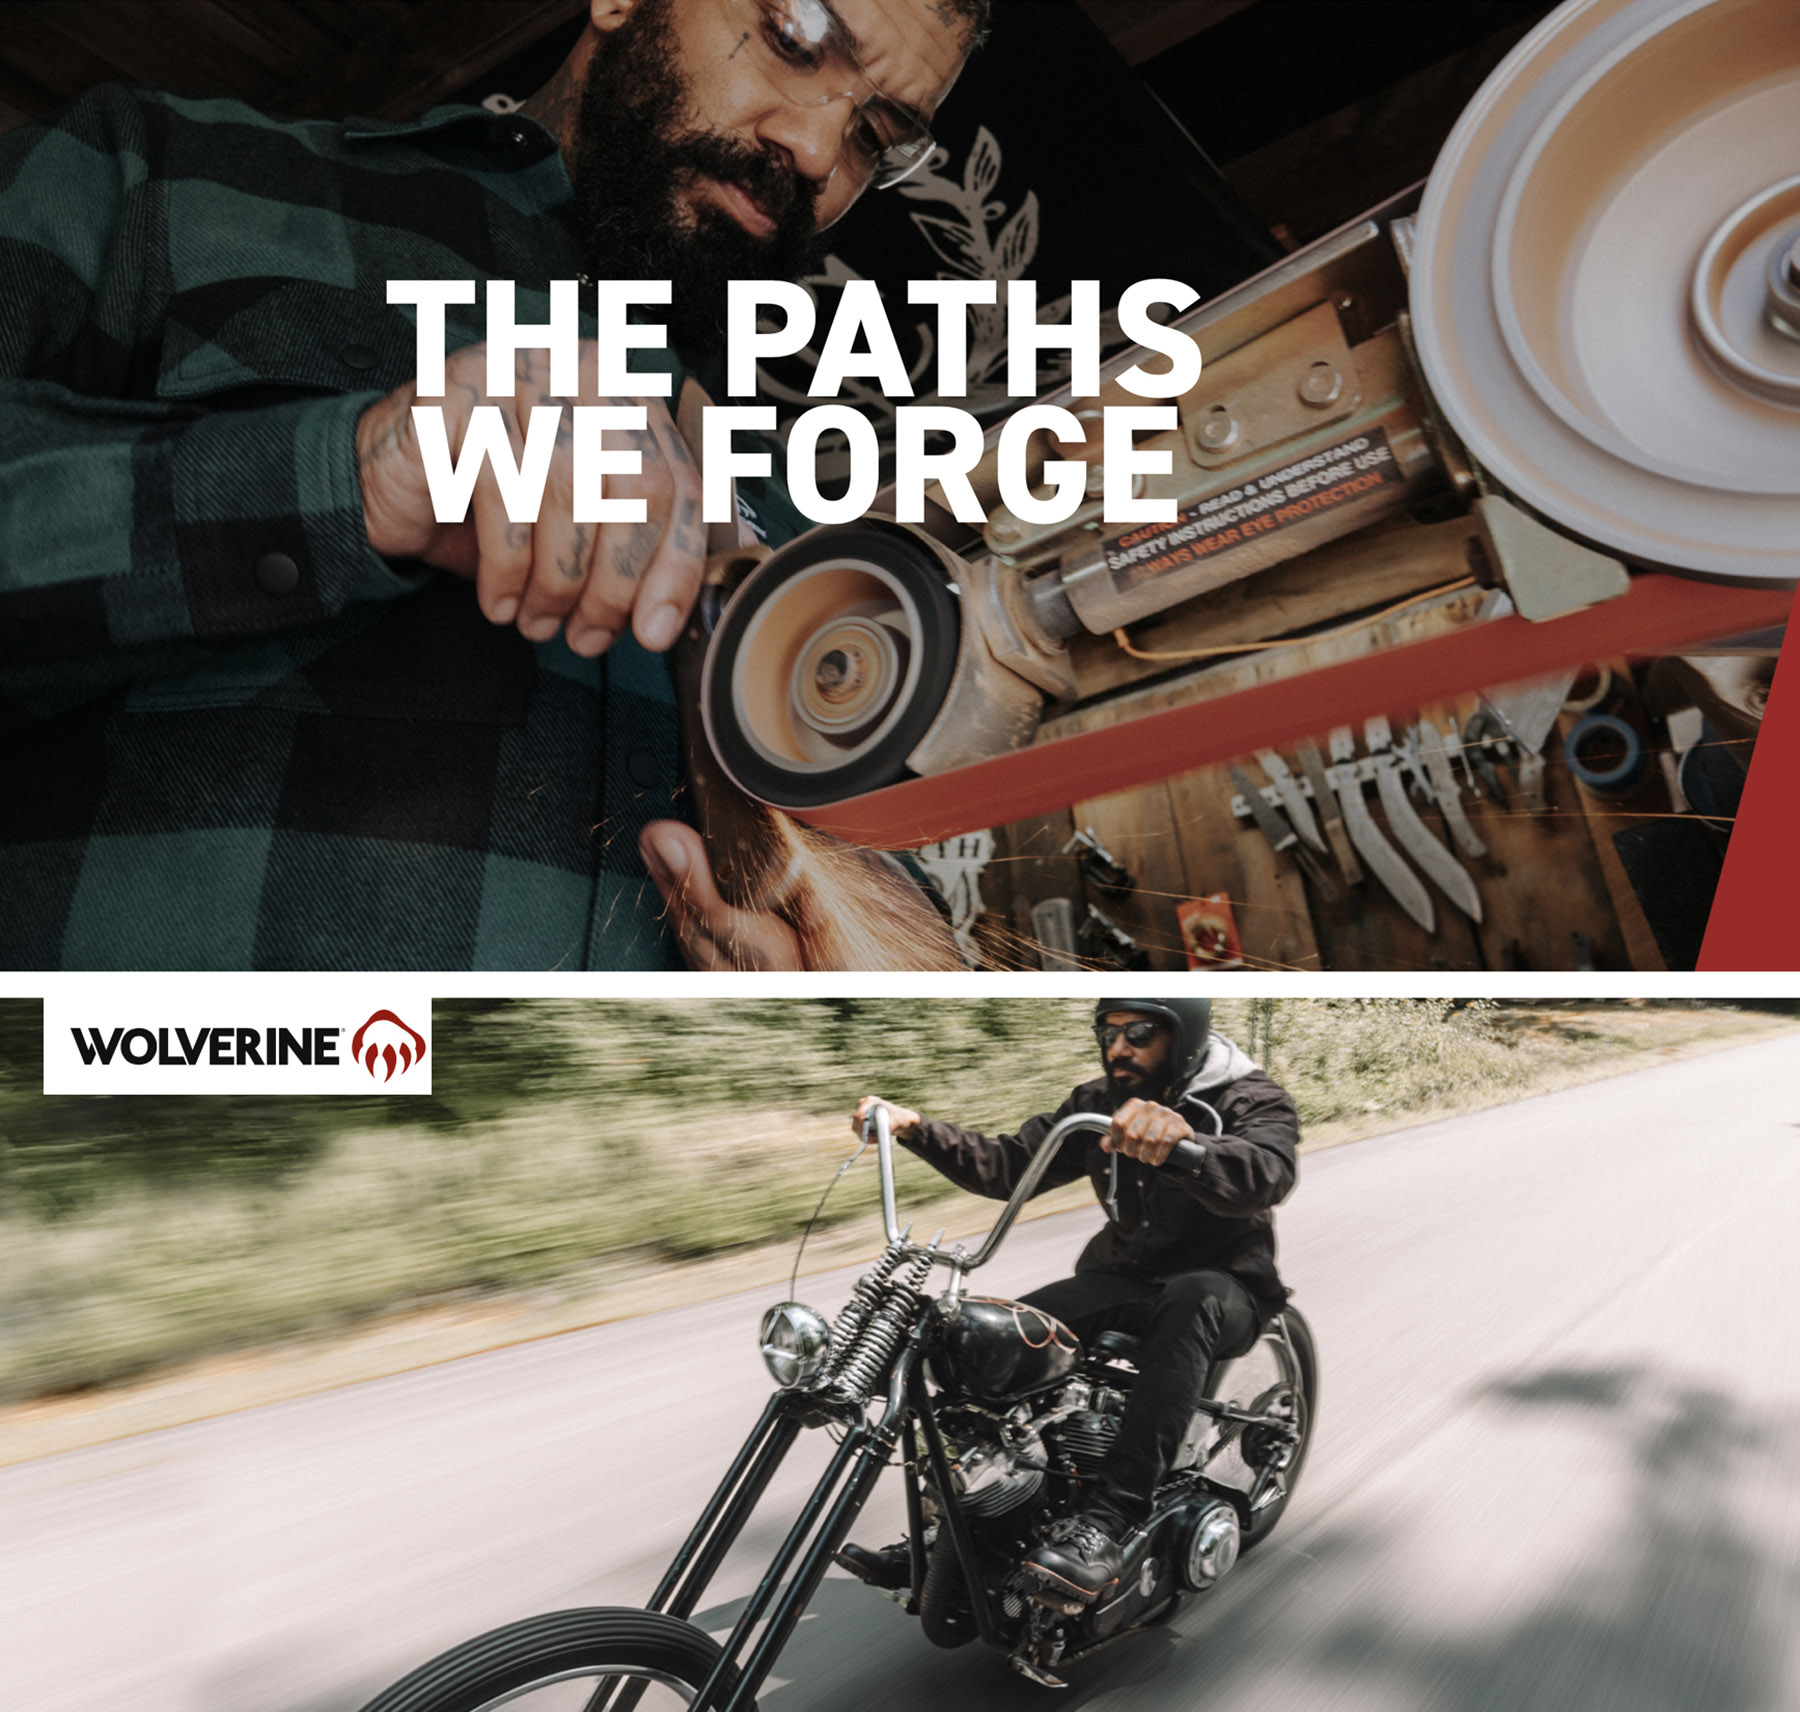 Wolverine Boots ad by Boston based commercial lifestyle and portrait photographer Brian Nevins